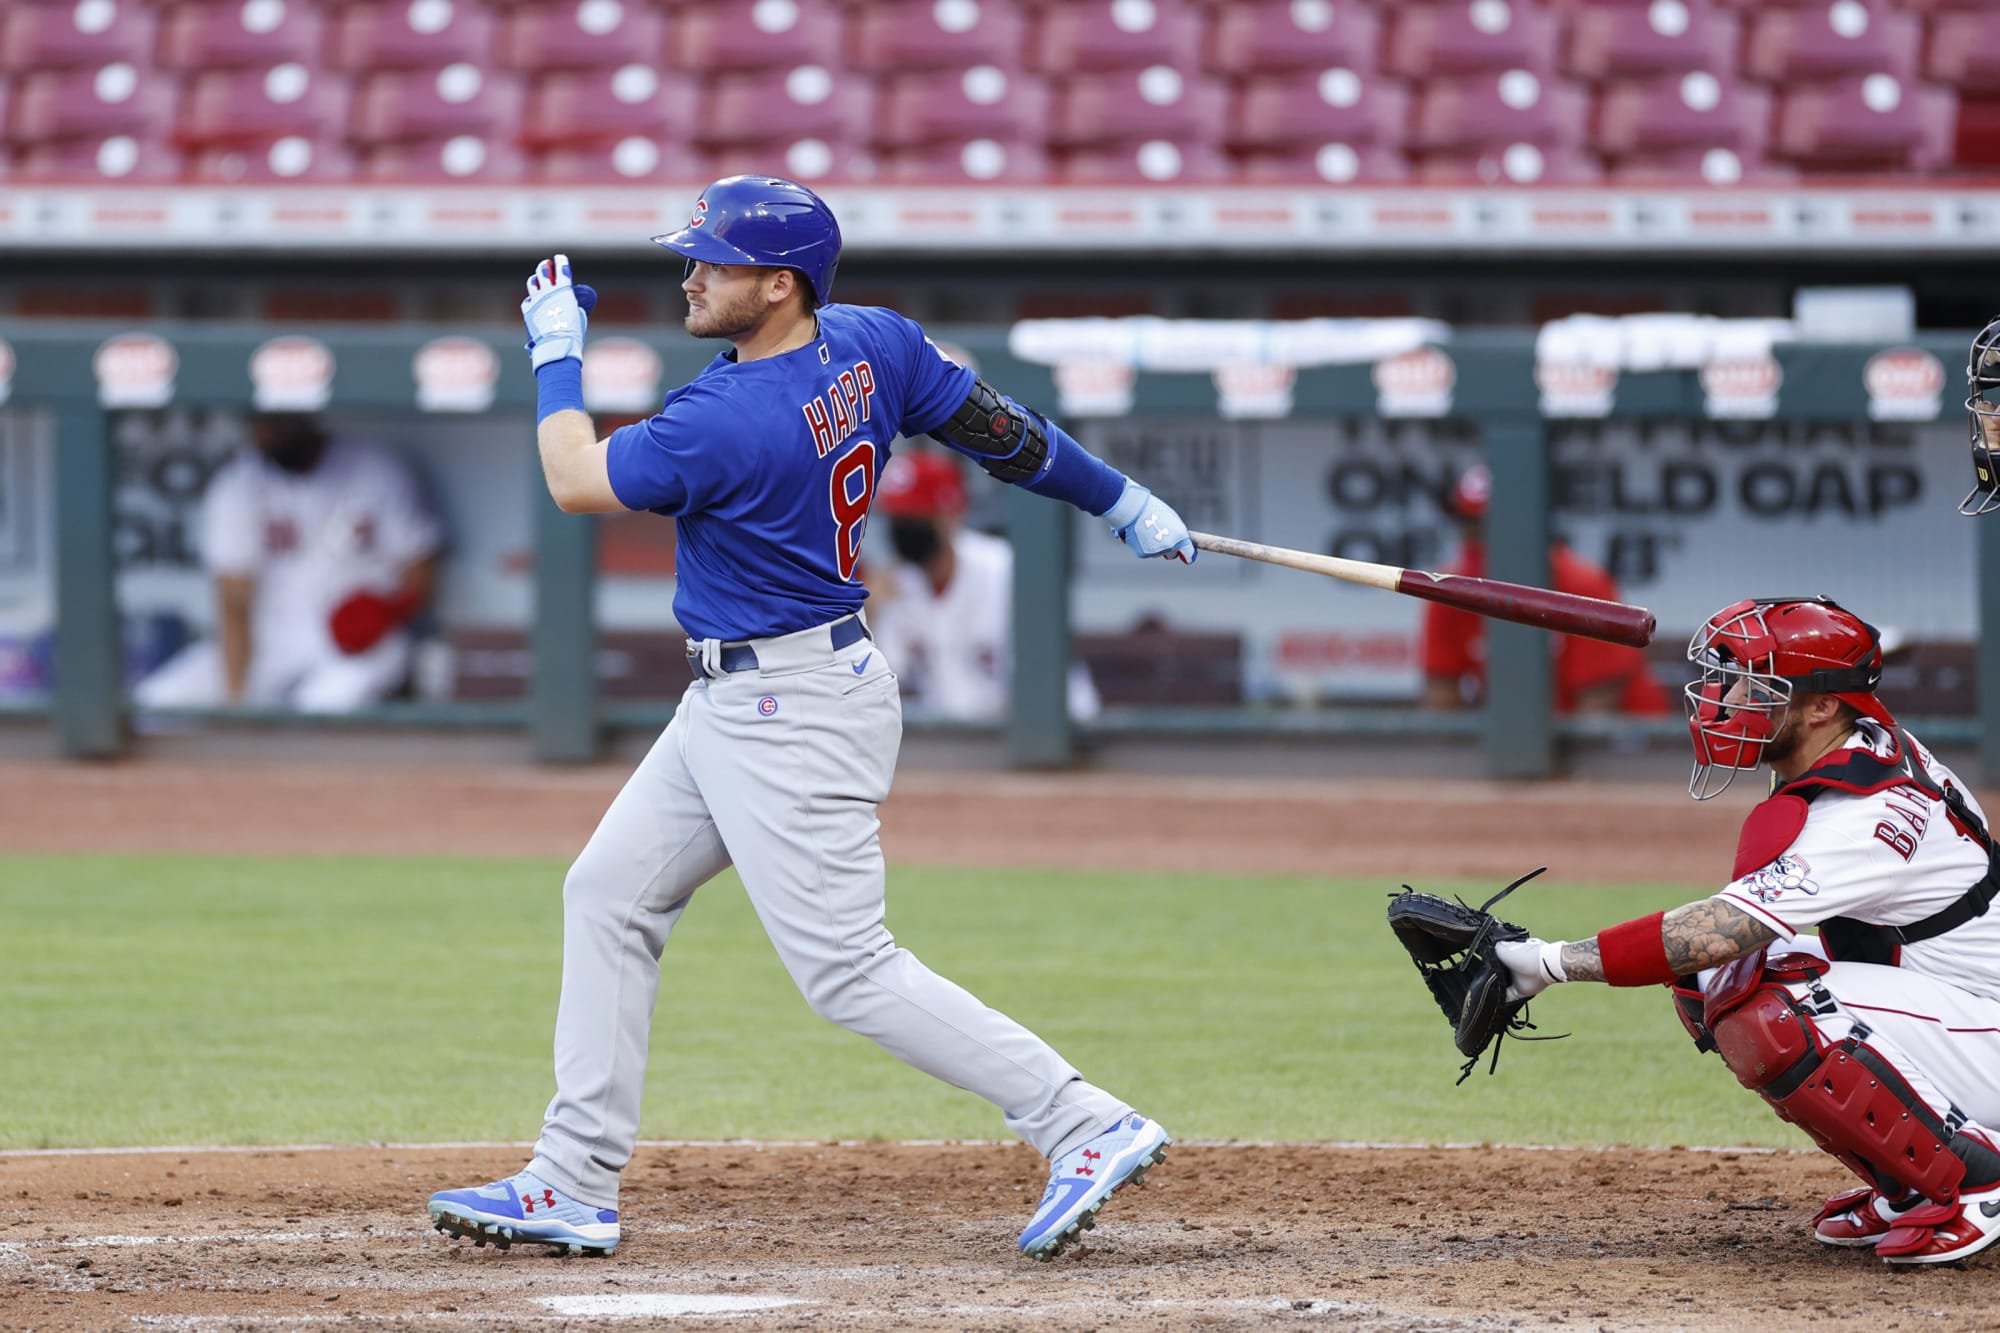 Cubs' Ian Happ is showing that he is the everyday center fielder